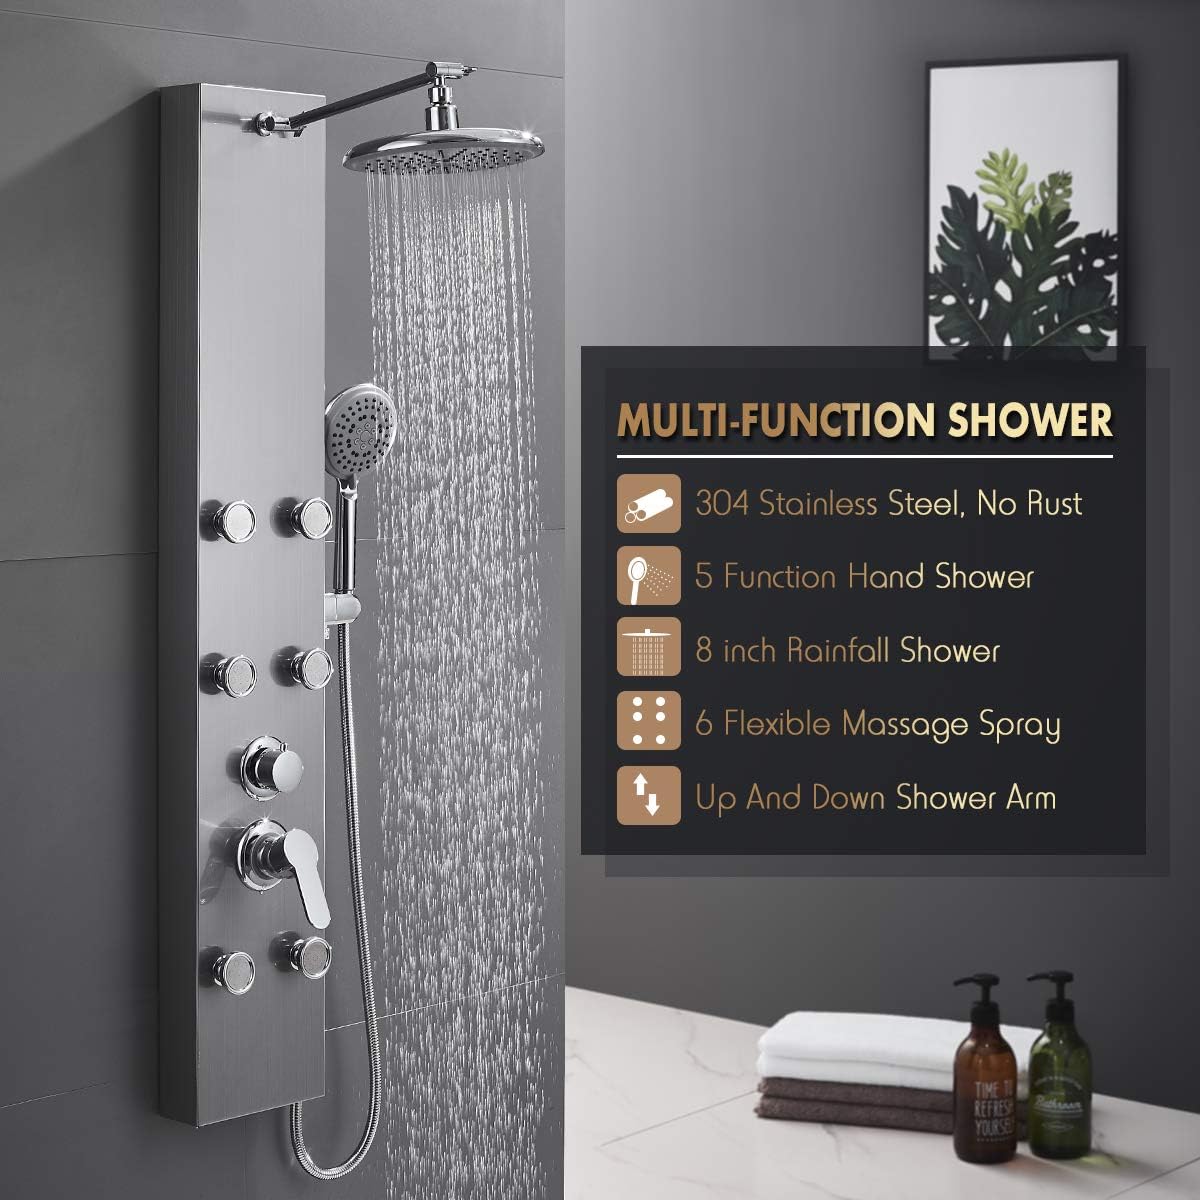 New ROVOGO 304 Stainless Steel Shower Panels System with 8-inch Rainfall Shower, 6 Body Jets and 5-Setting Handheld Shower Wand, Shower Tower with Adjustable Head, Stainless Steel Brushed, Retails $260+